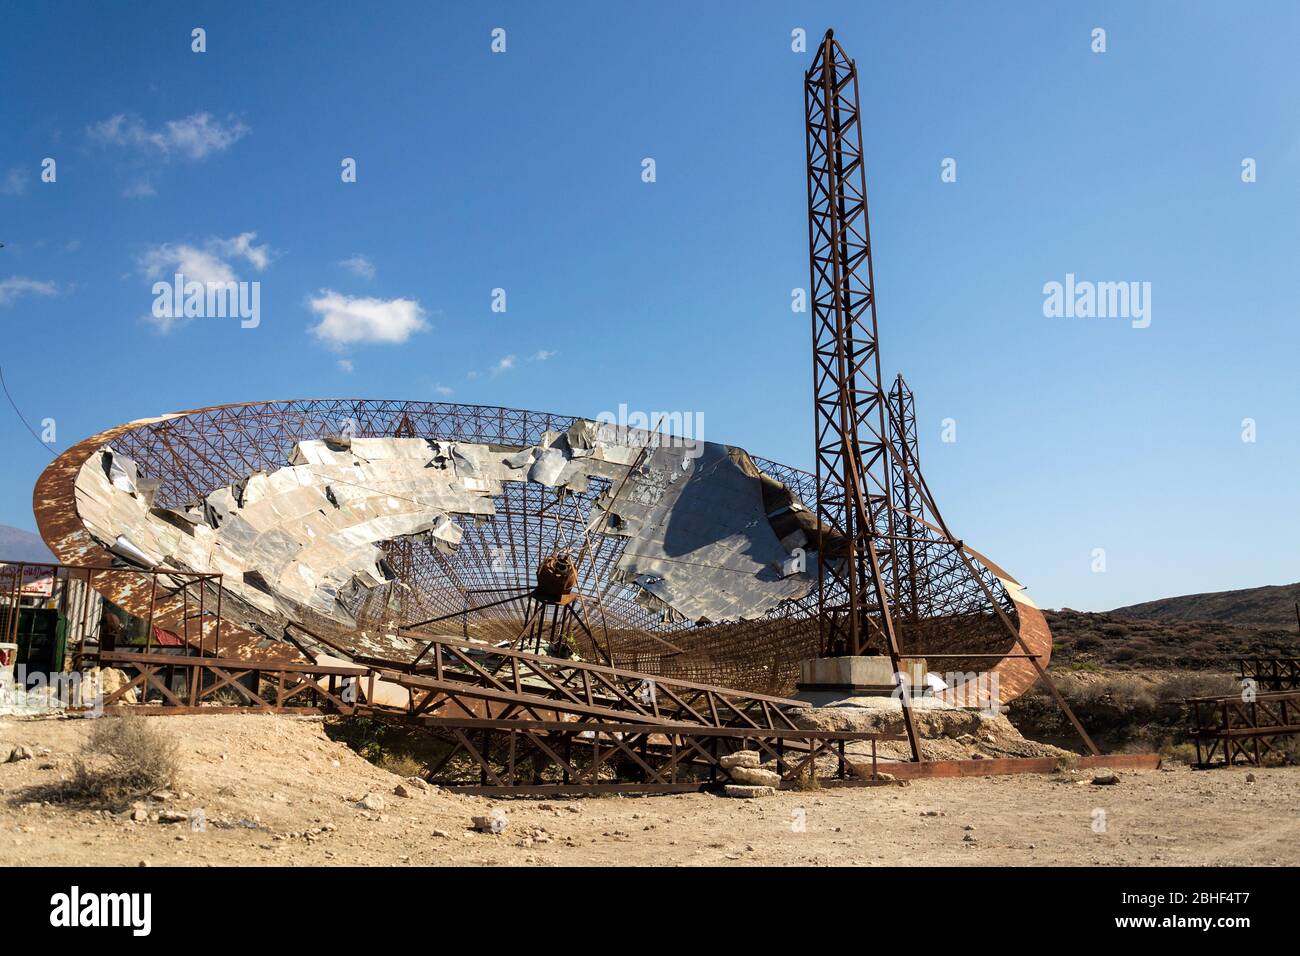 Old satellite dish antenna in dry arid land near El Medano, Tenerife, Canary Islands, Spain, telecommunication and wireless communication security Stock Photo